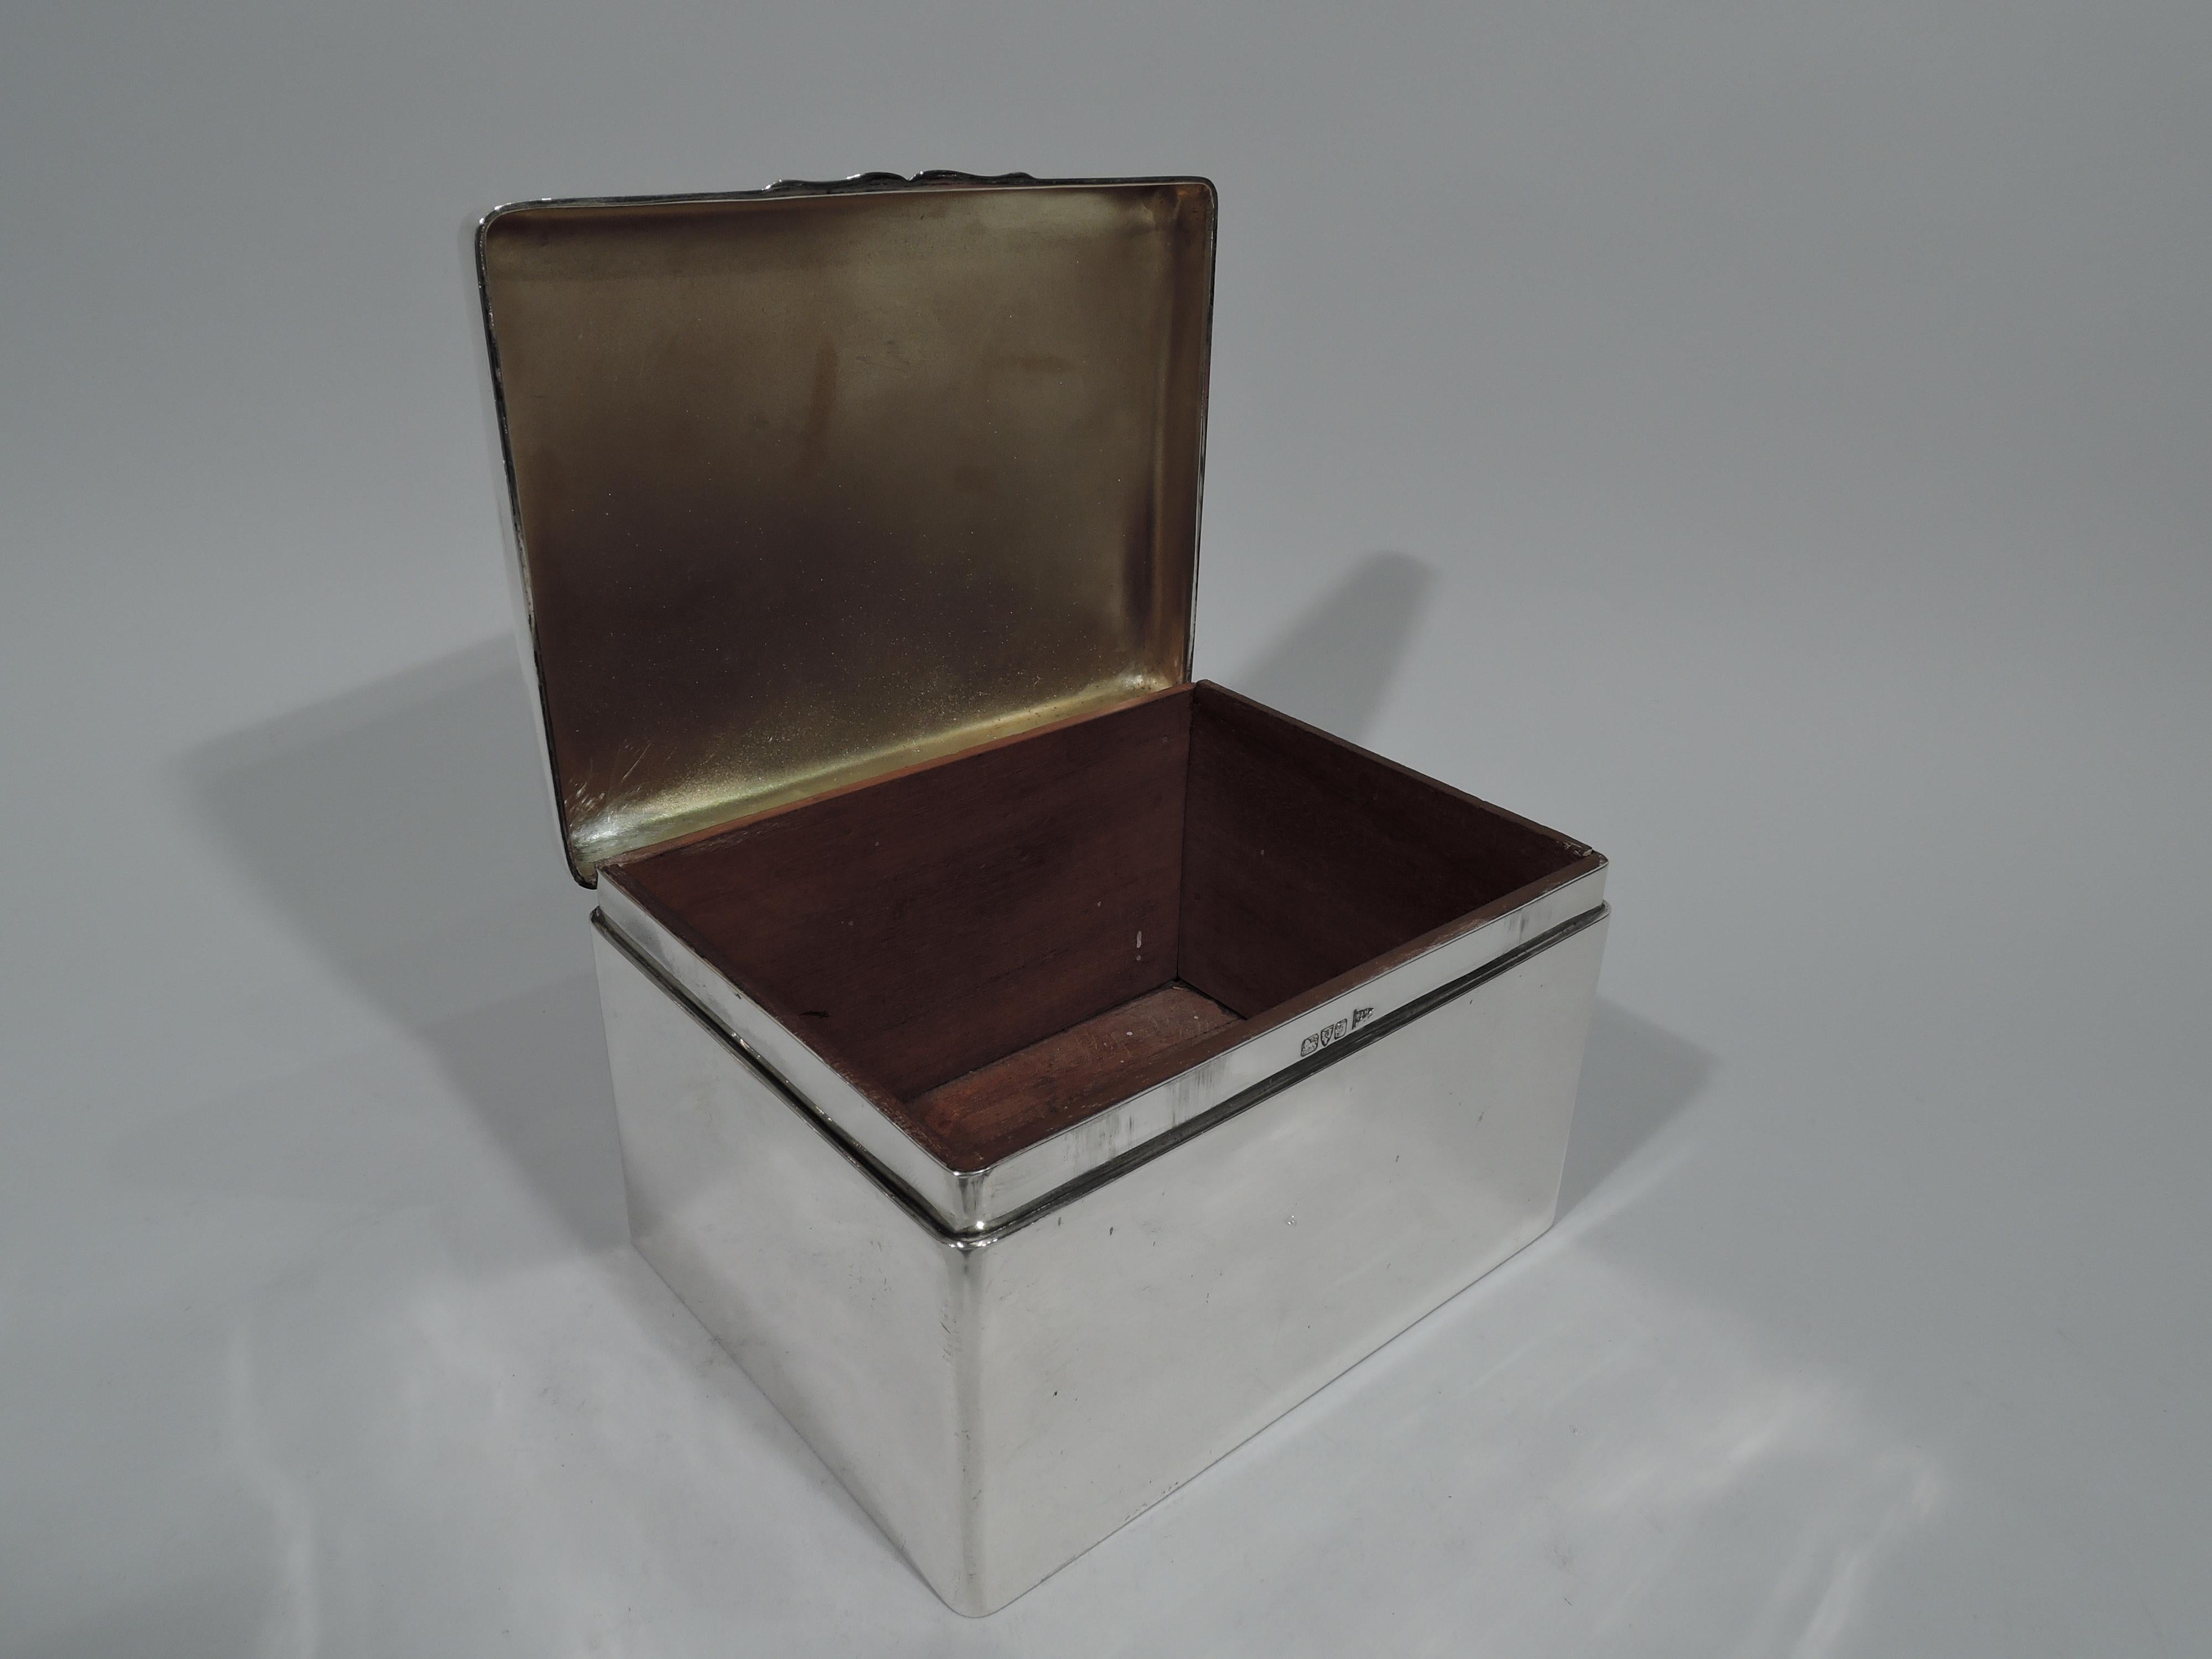 Early 20th Century Antique English Edwardian Sterling Silver Casket Box by Walker & Hall